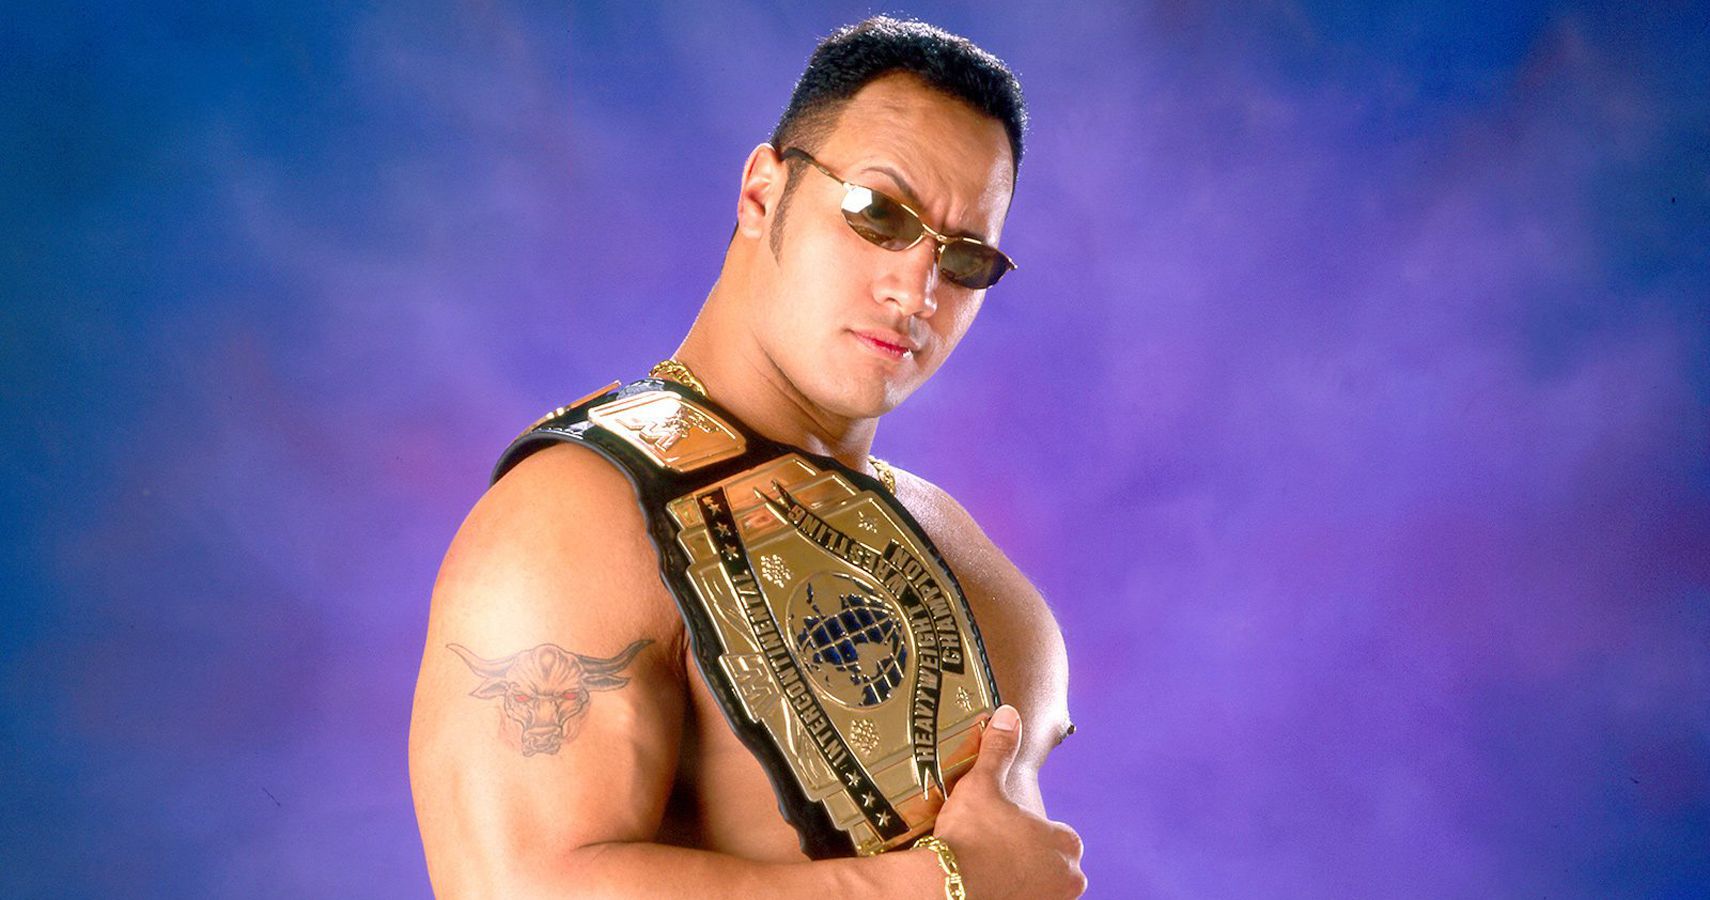 10 vintage photos of the Rock